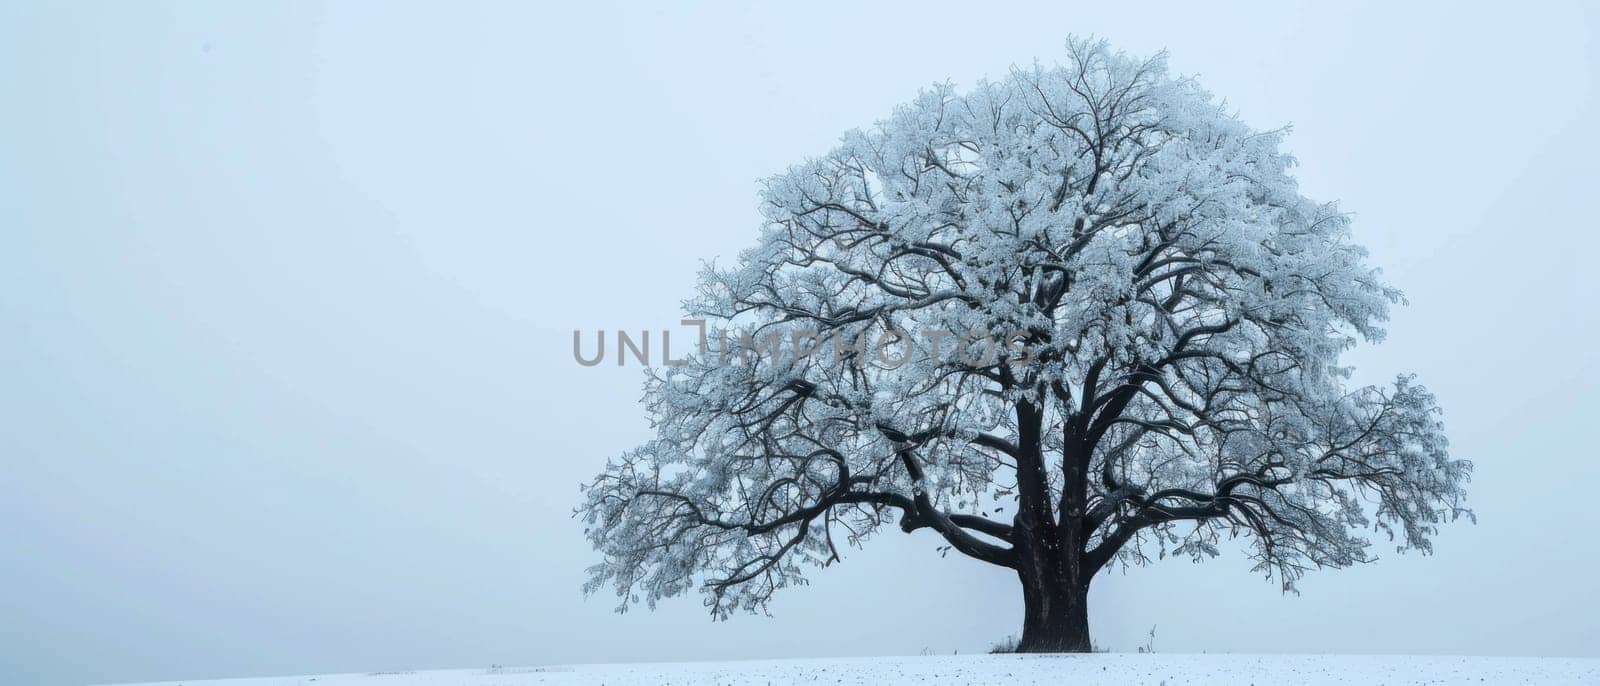 A large white tree stands alone in a snow-covered field.